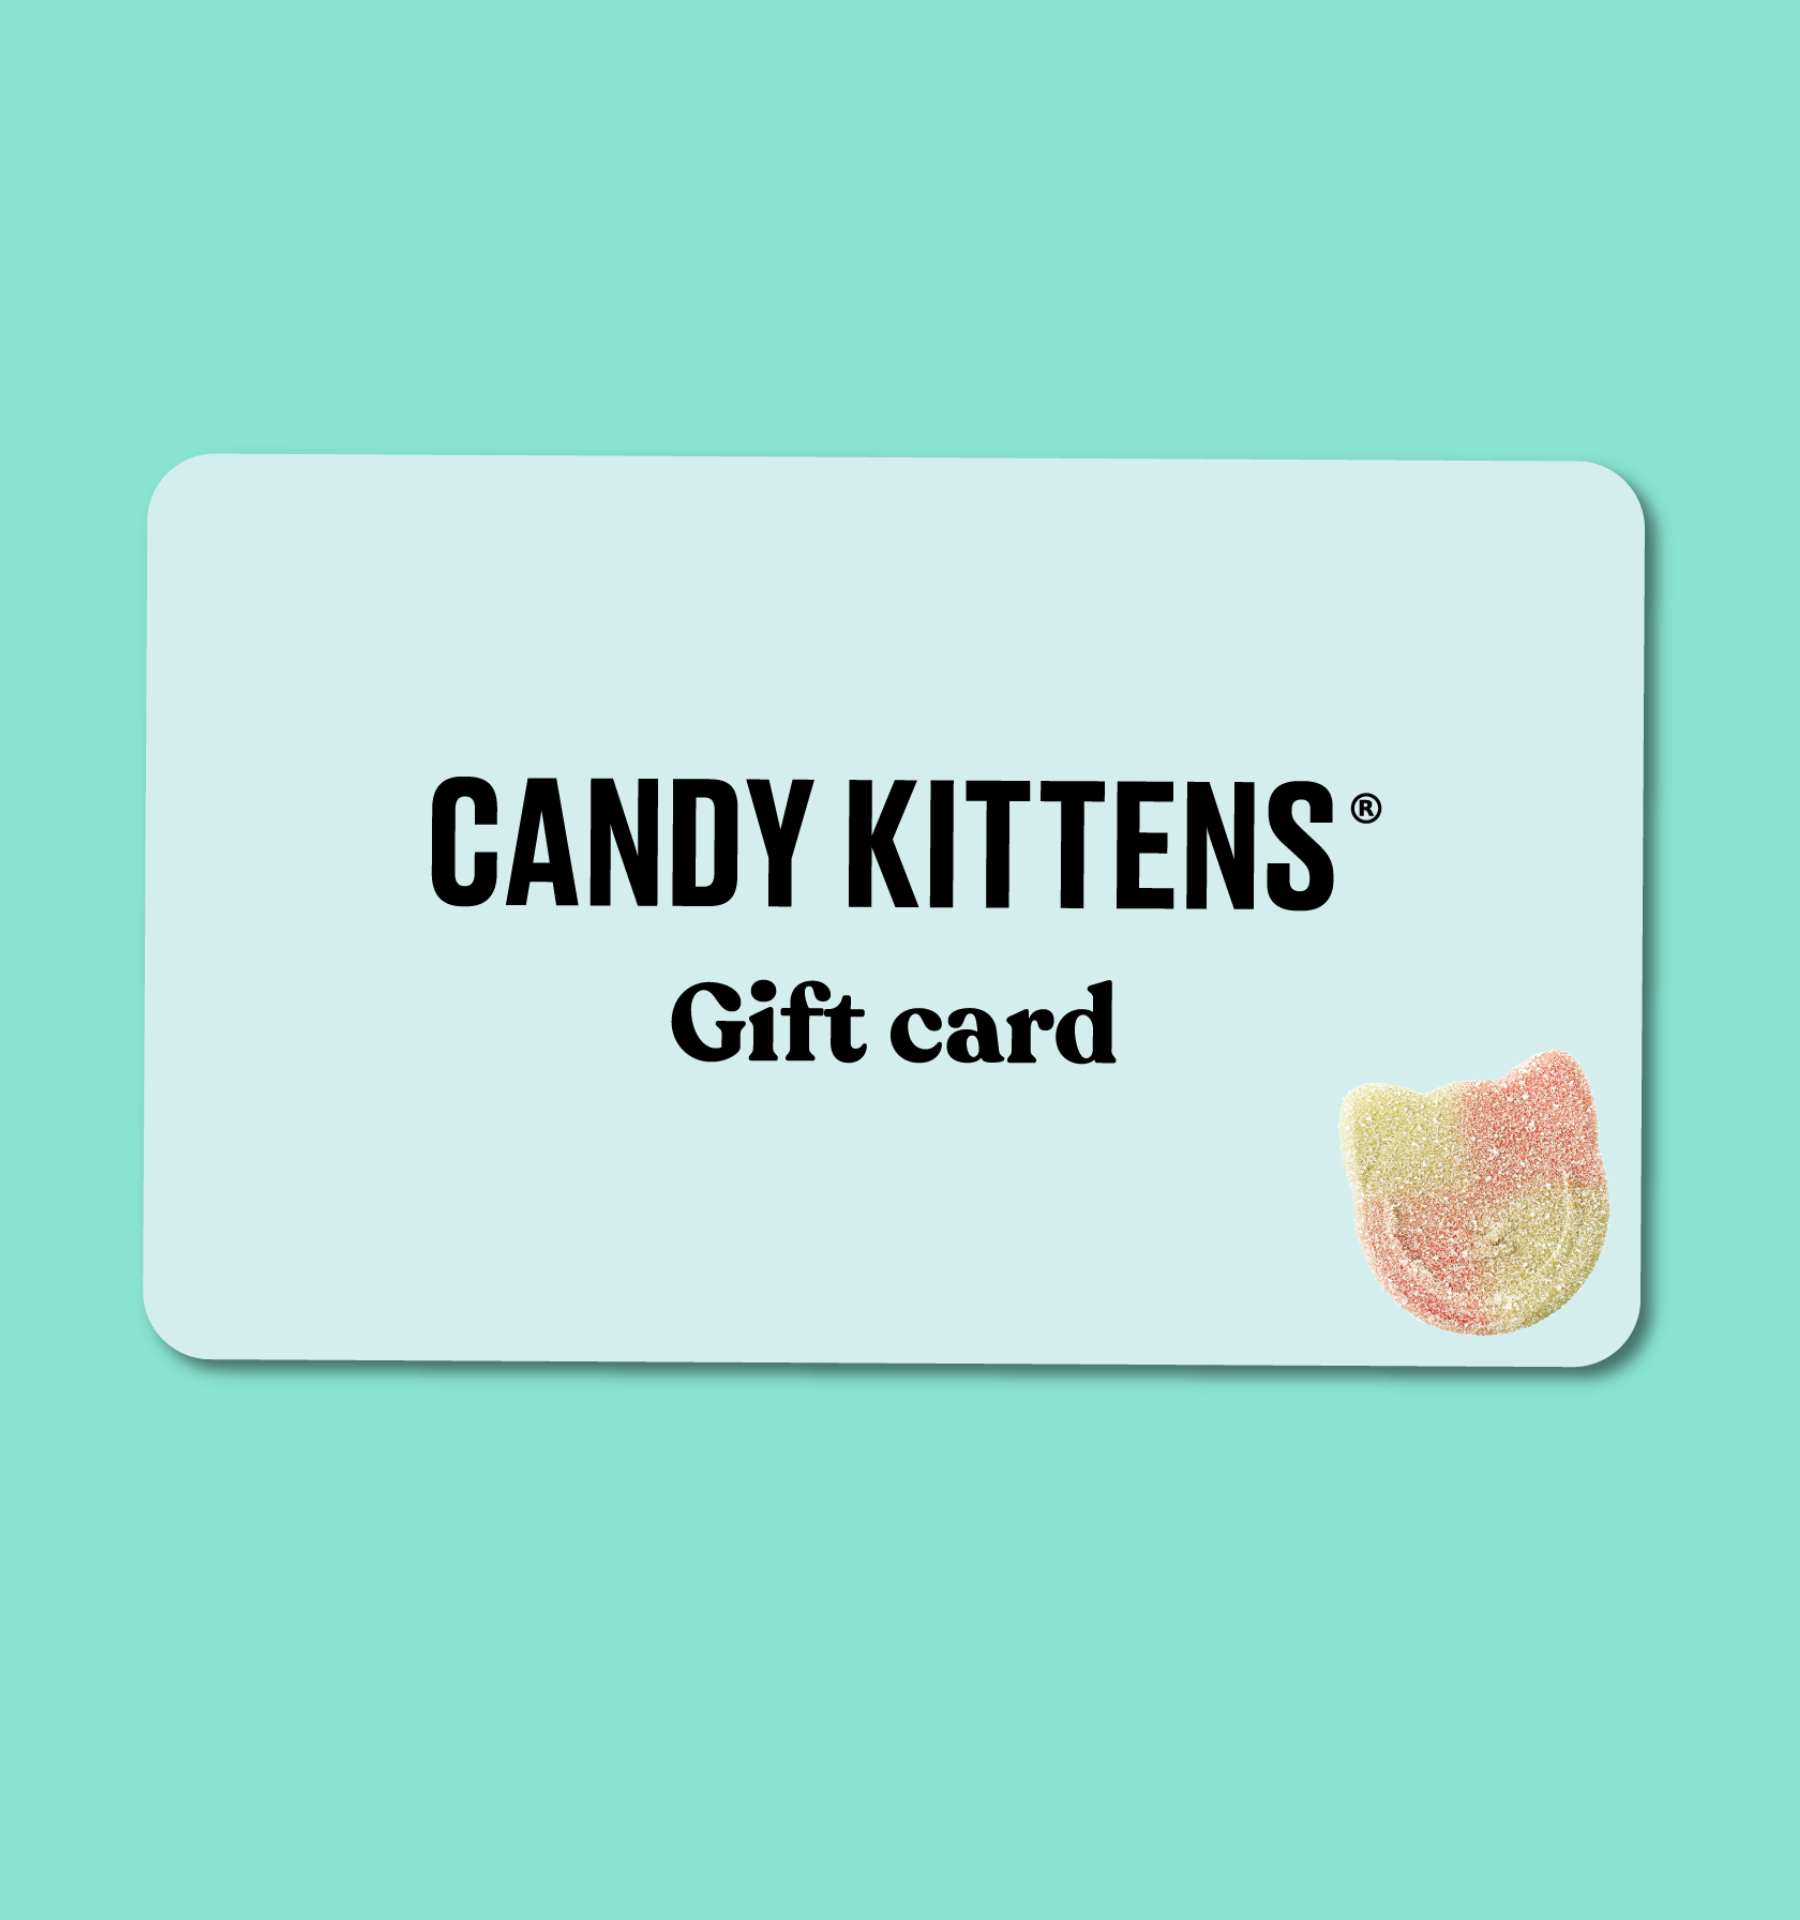 Candy Kittens Gift Card